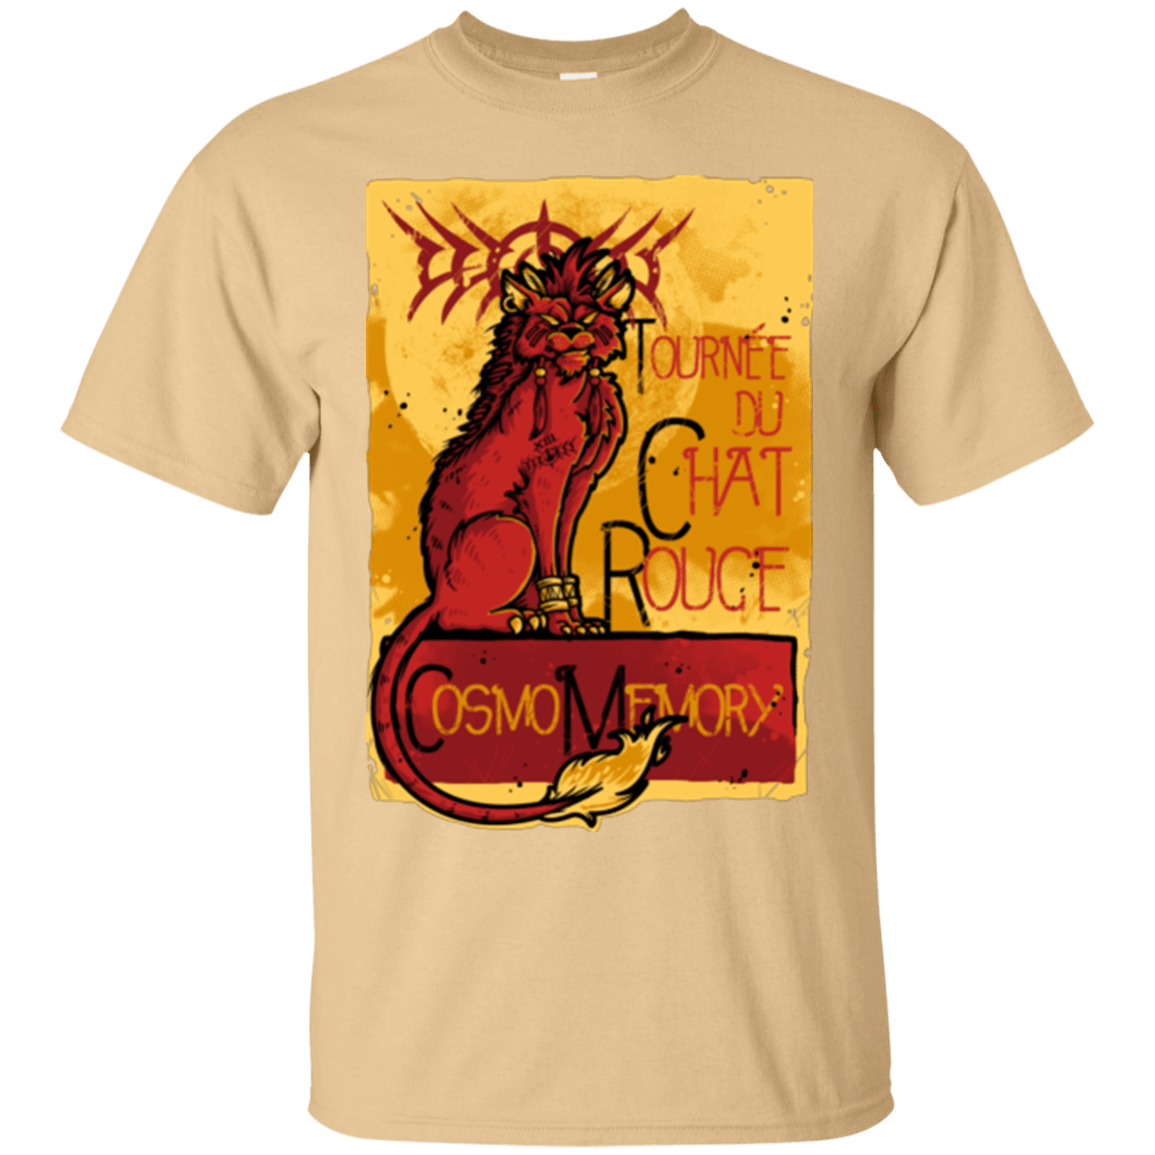 T-Shirts Vegas Gold / Small LE CHAT ROUGE T-Shirt